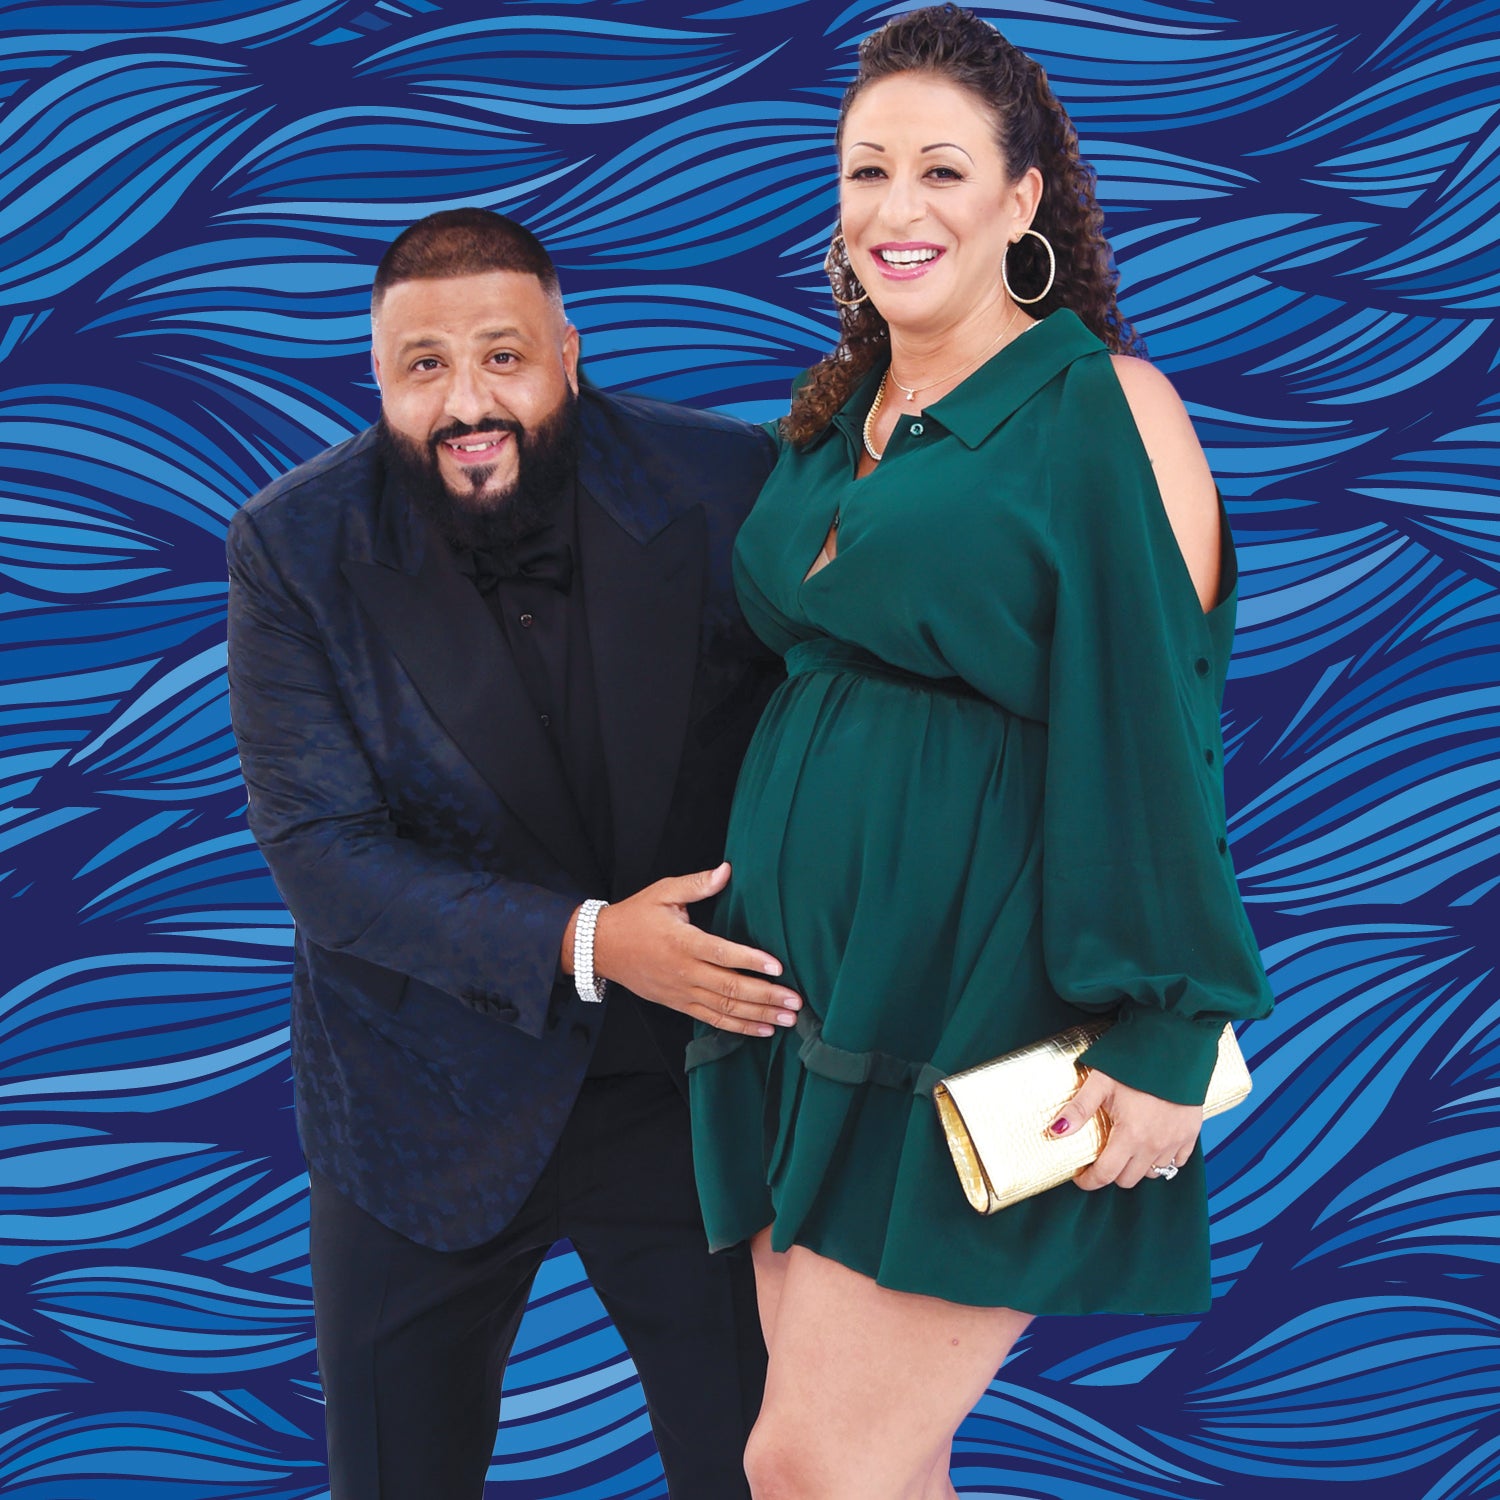 Major Key! DJ Khaled Welcomes Son and Documents It on Snapchat